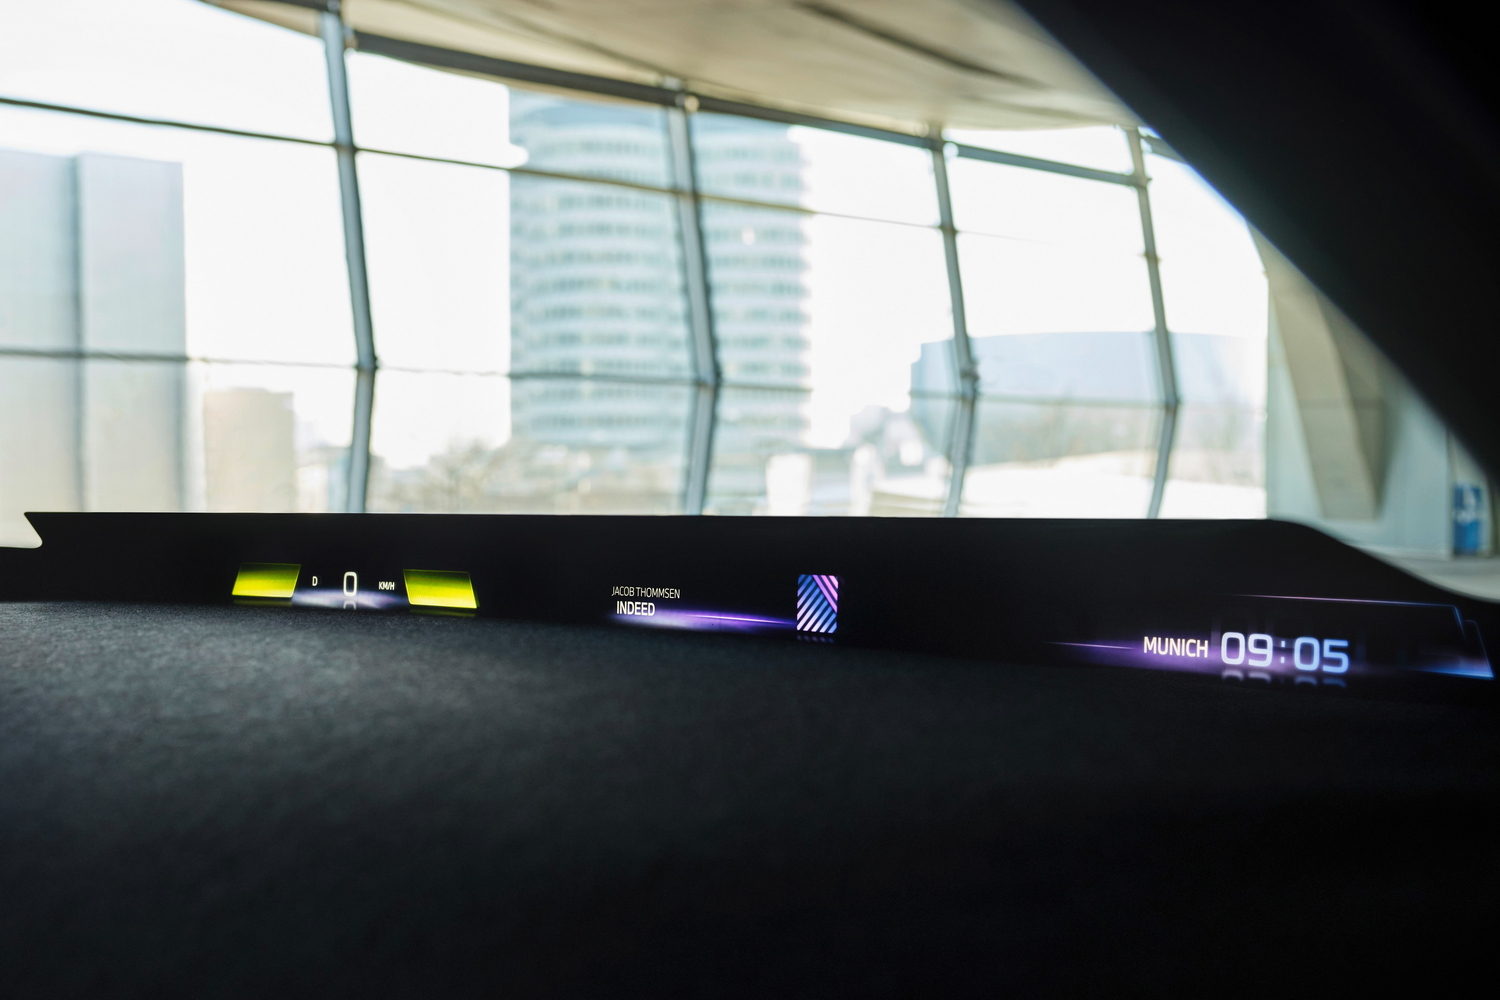 BMW Panoramic Vision extends head-up display